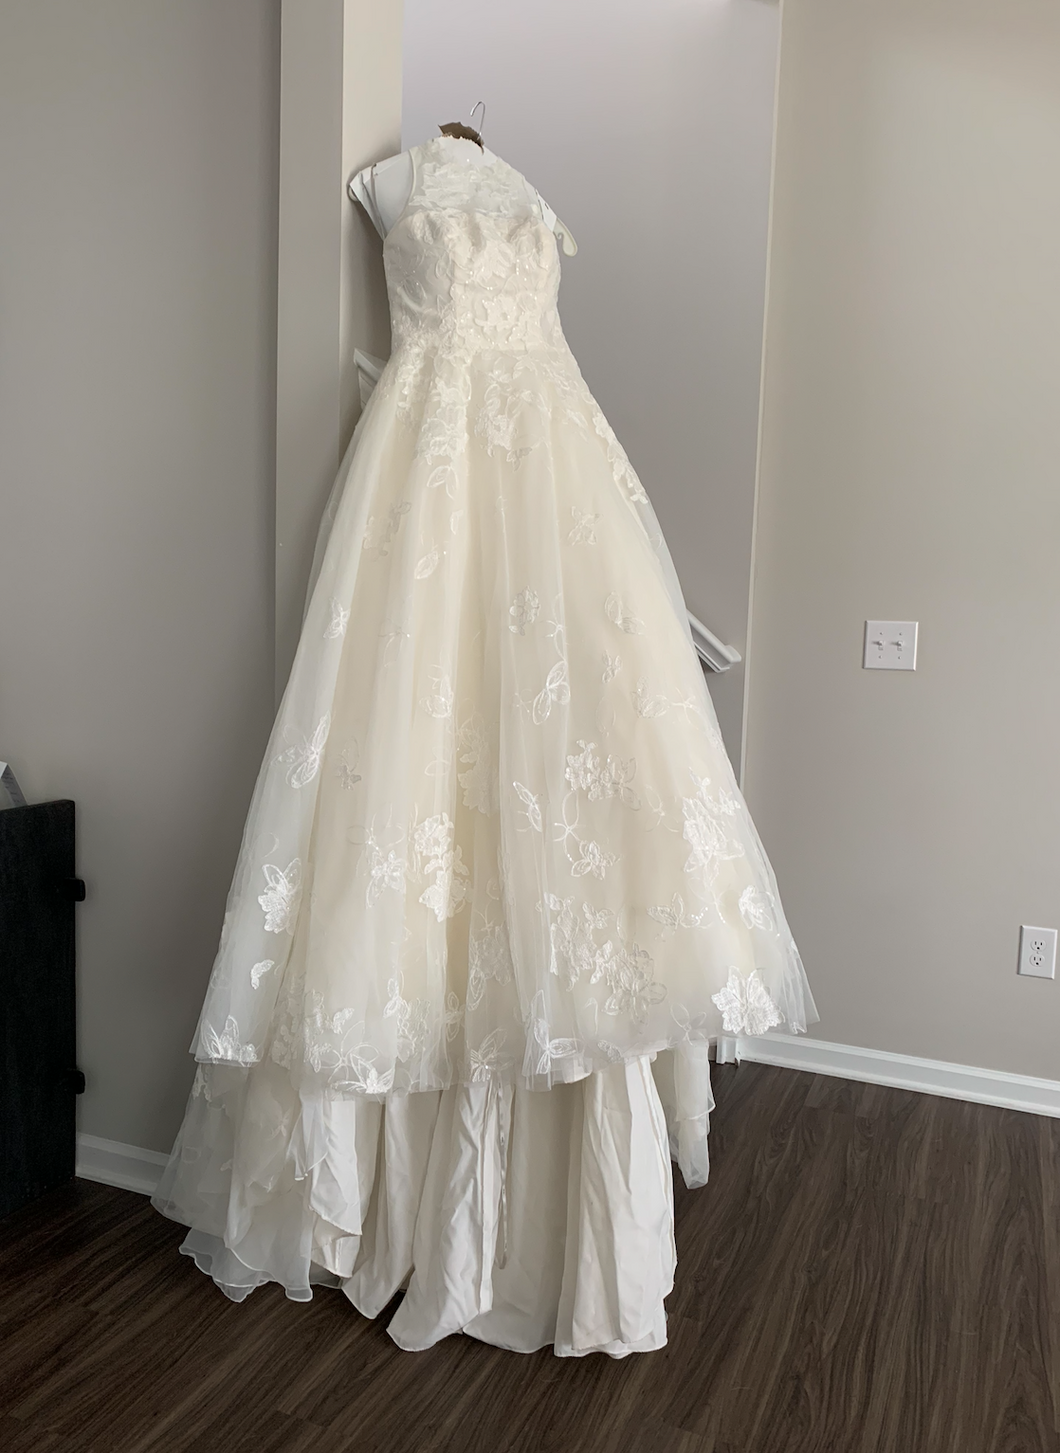 White by Vera Wang 'VW351426' wedding dress size-06 PREOWNED